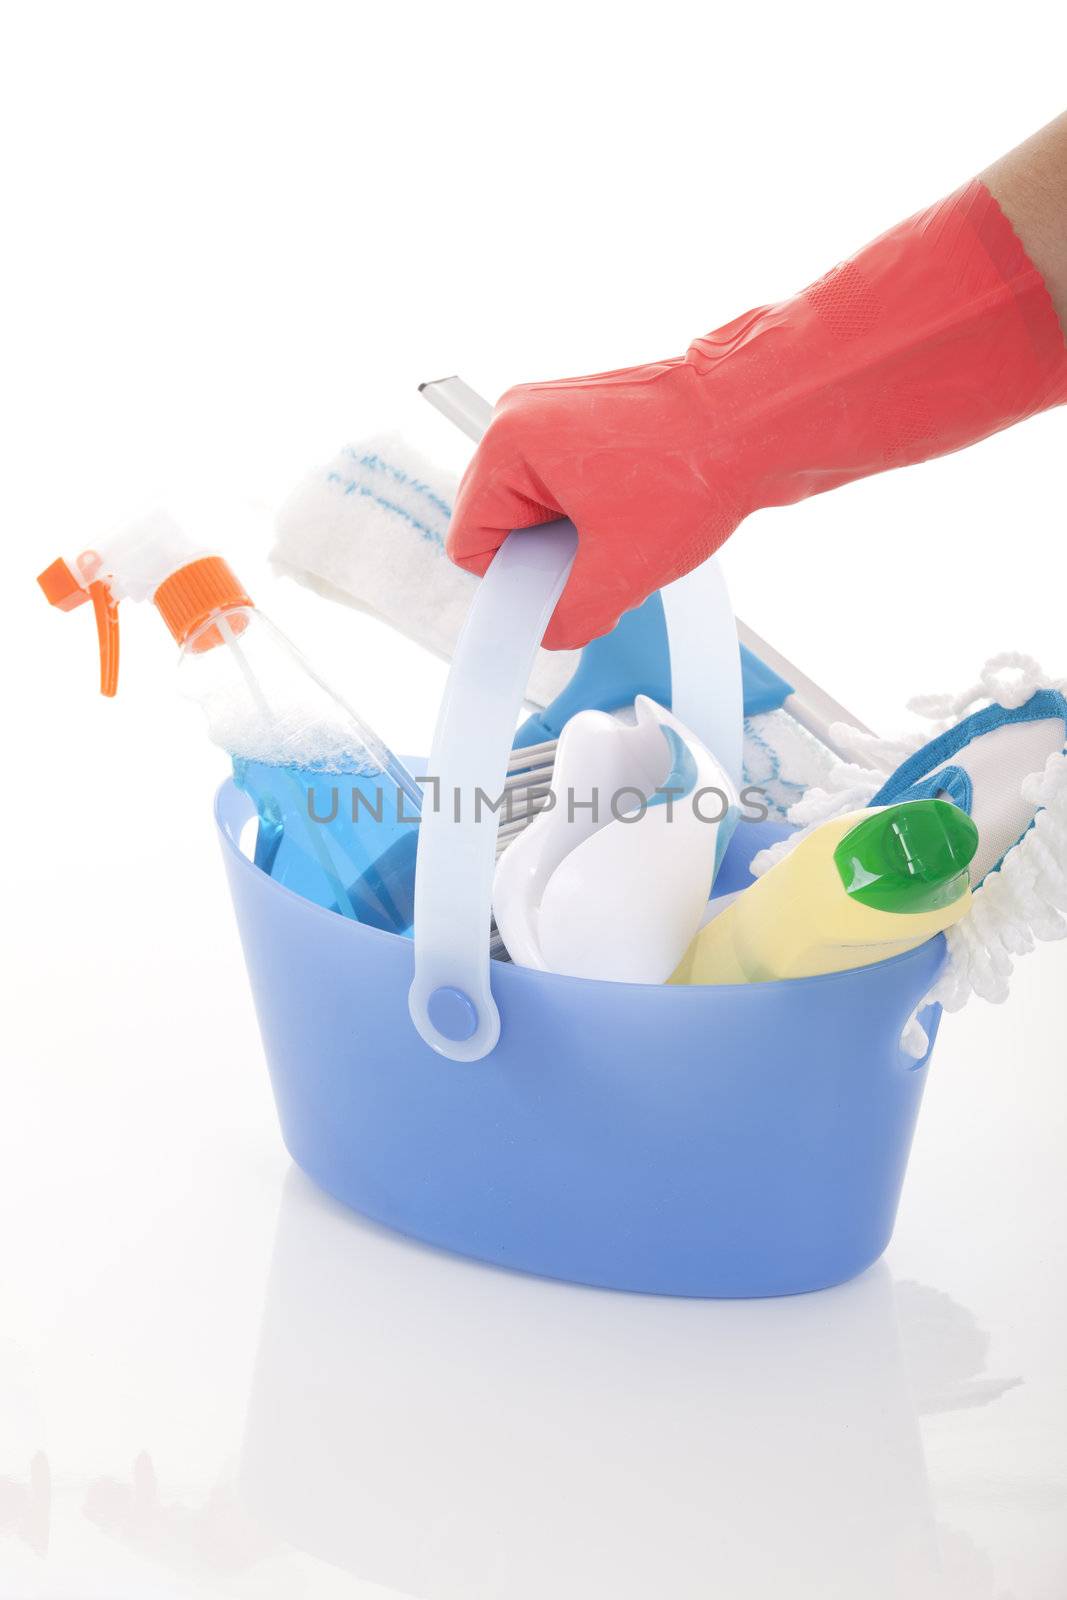 Plastic bucket with cleaning supplies on white background 